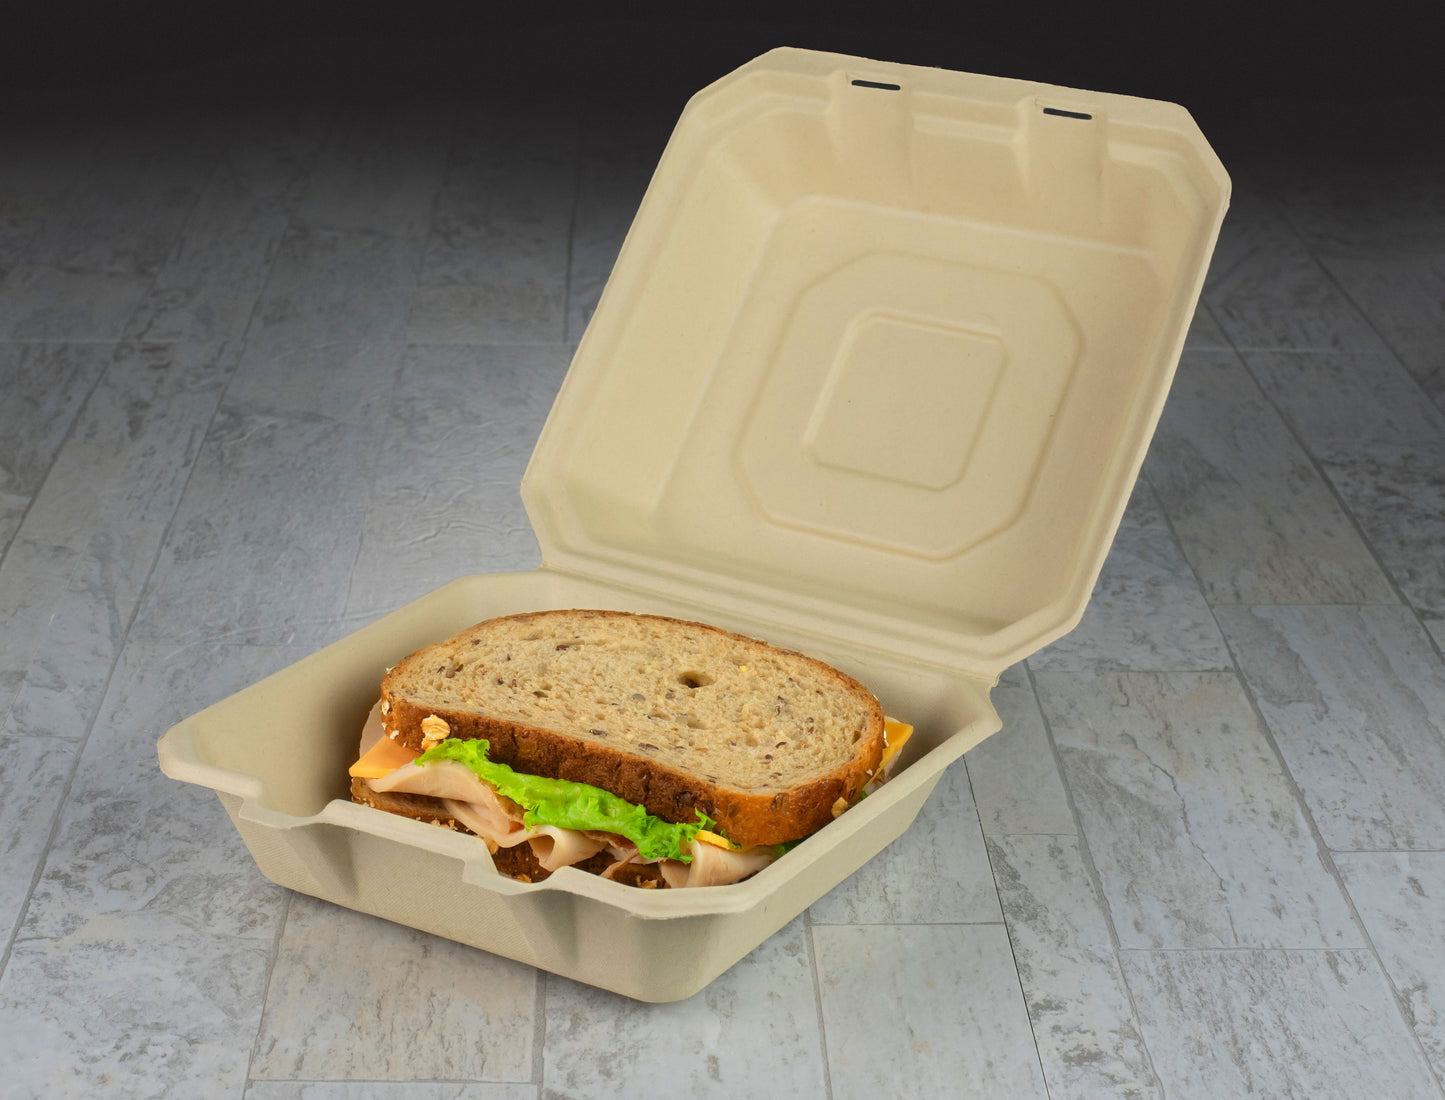 8" x 8" Compostable Clamshell | 1 Compartment | No PFAS Added